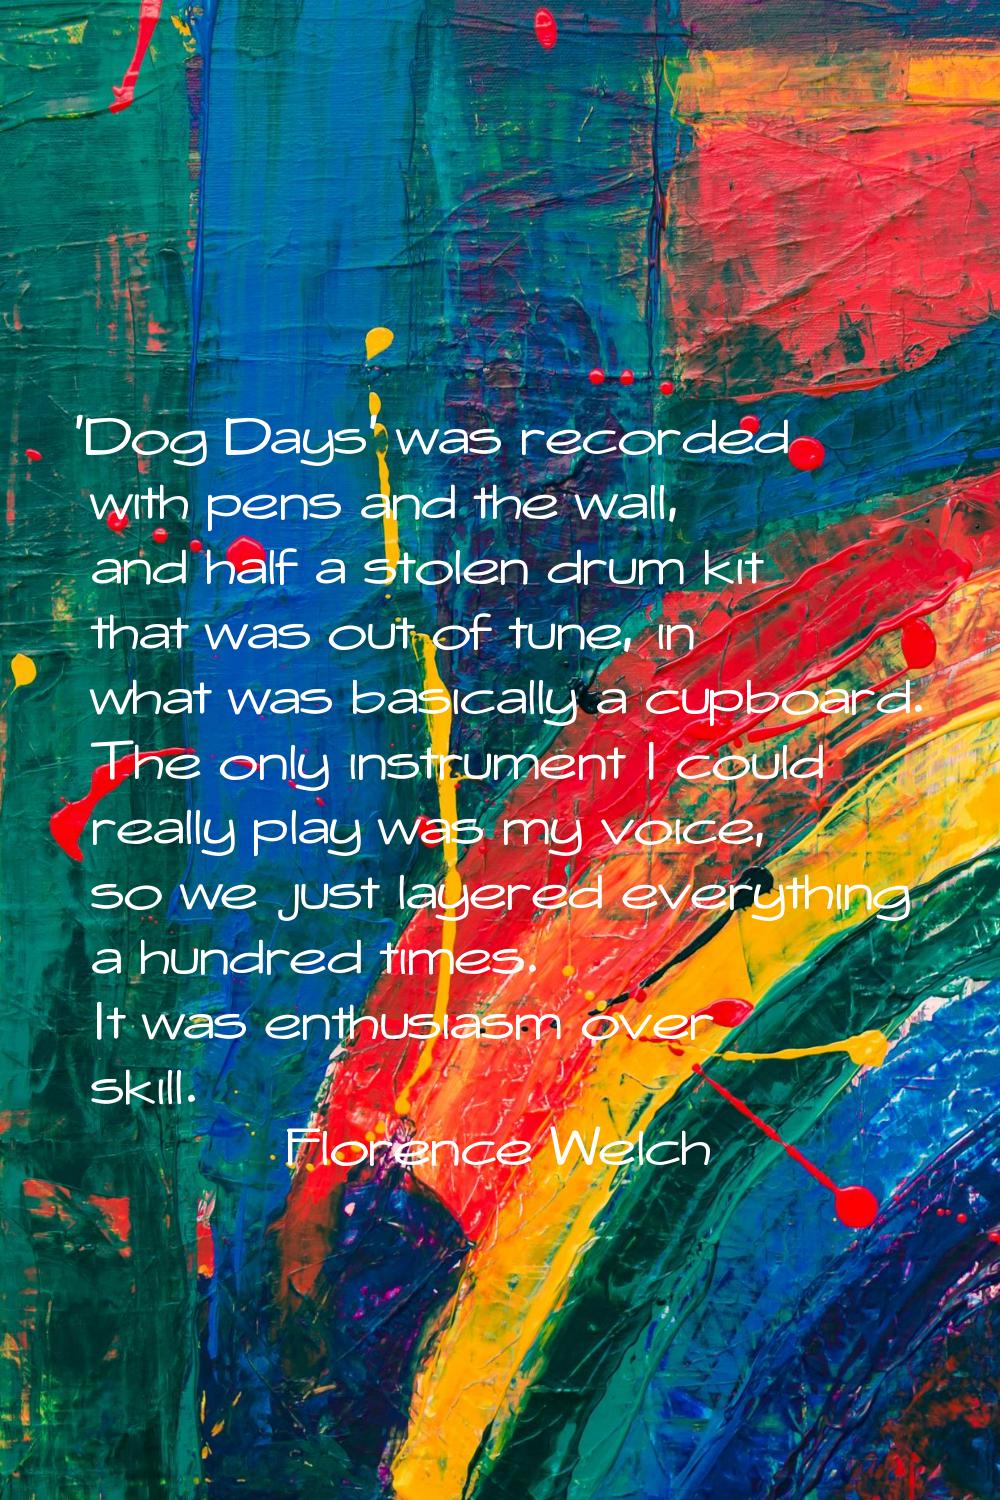 'Dog Days' was recorded with pens and the wall, and half a stolen drum kit that was out of tune, in